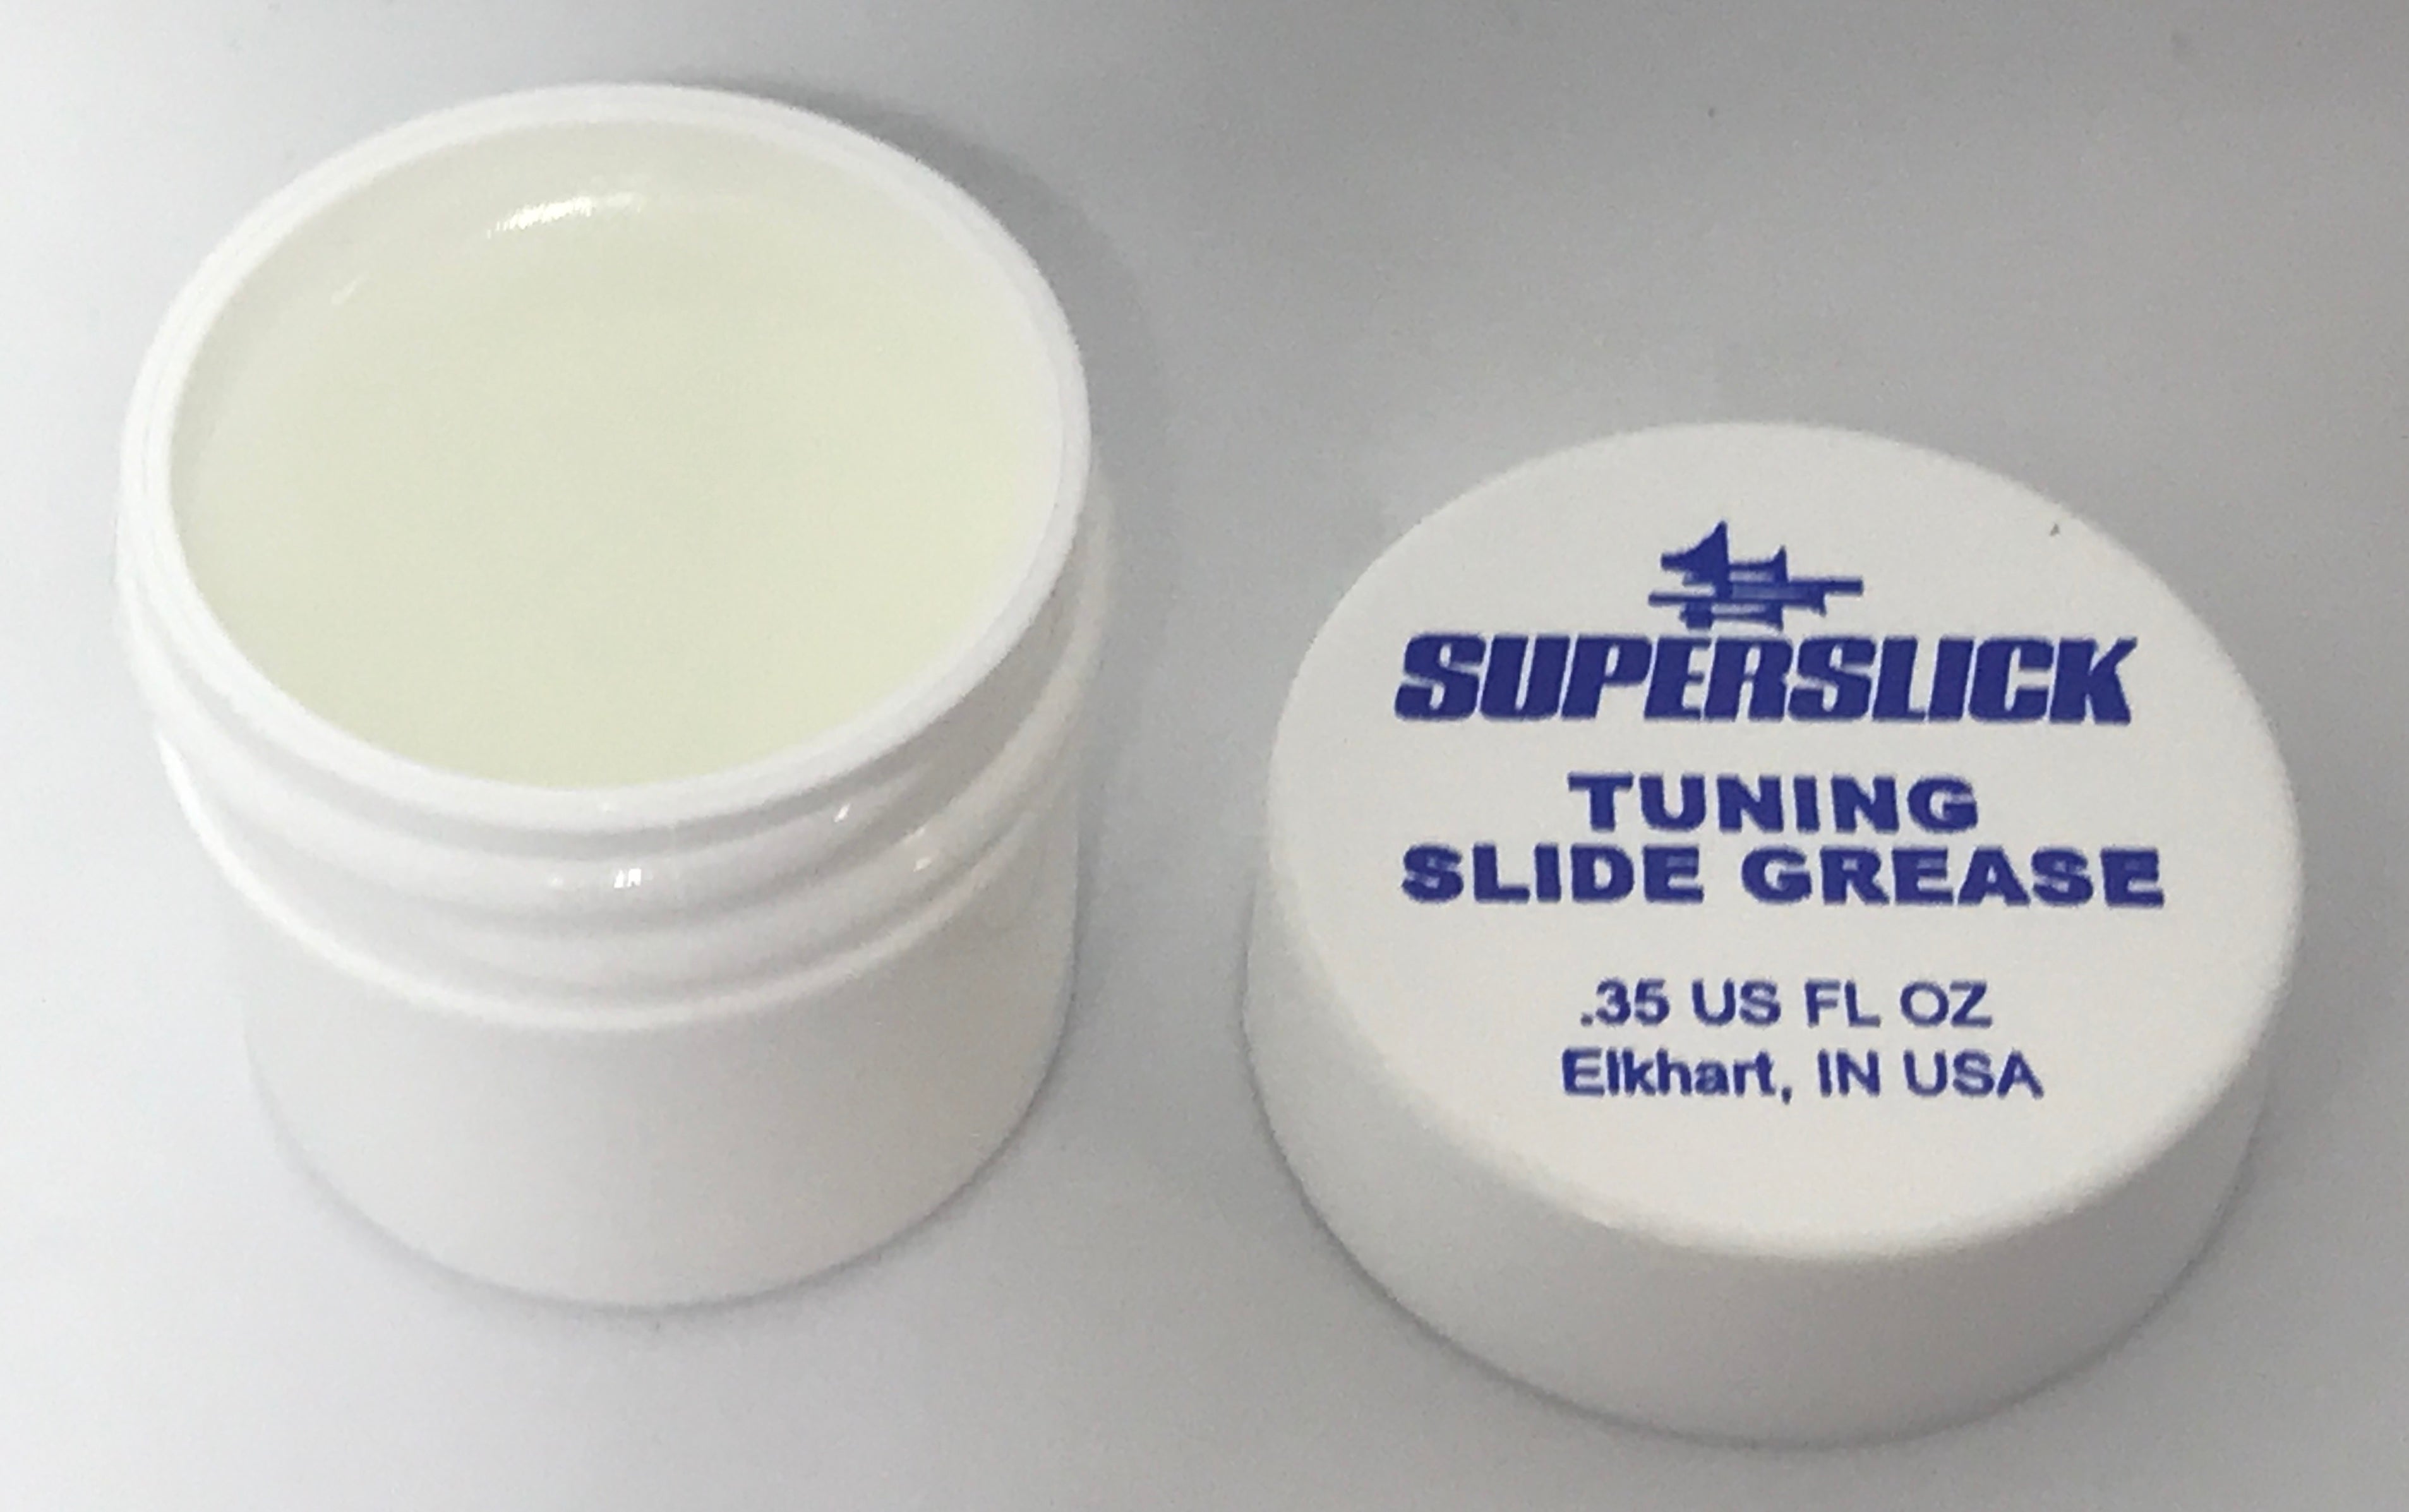 SuperSlick Tuning Slide Grease .25oz tub buttery smooth